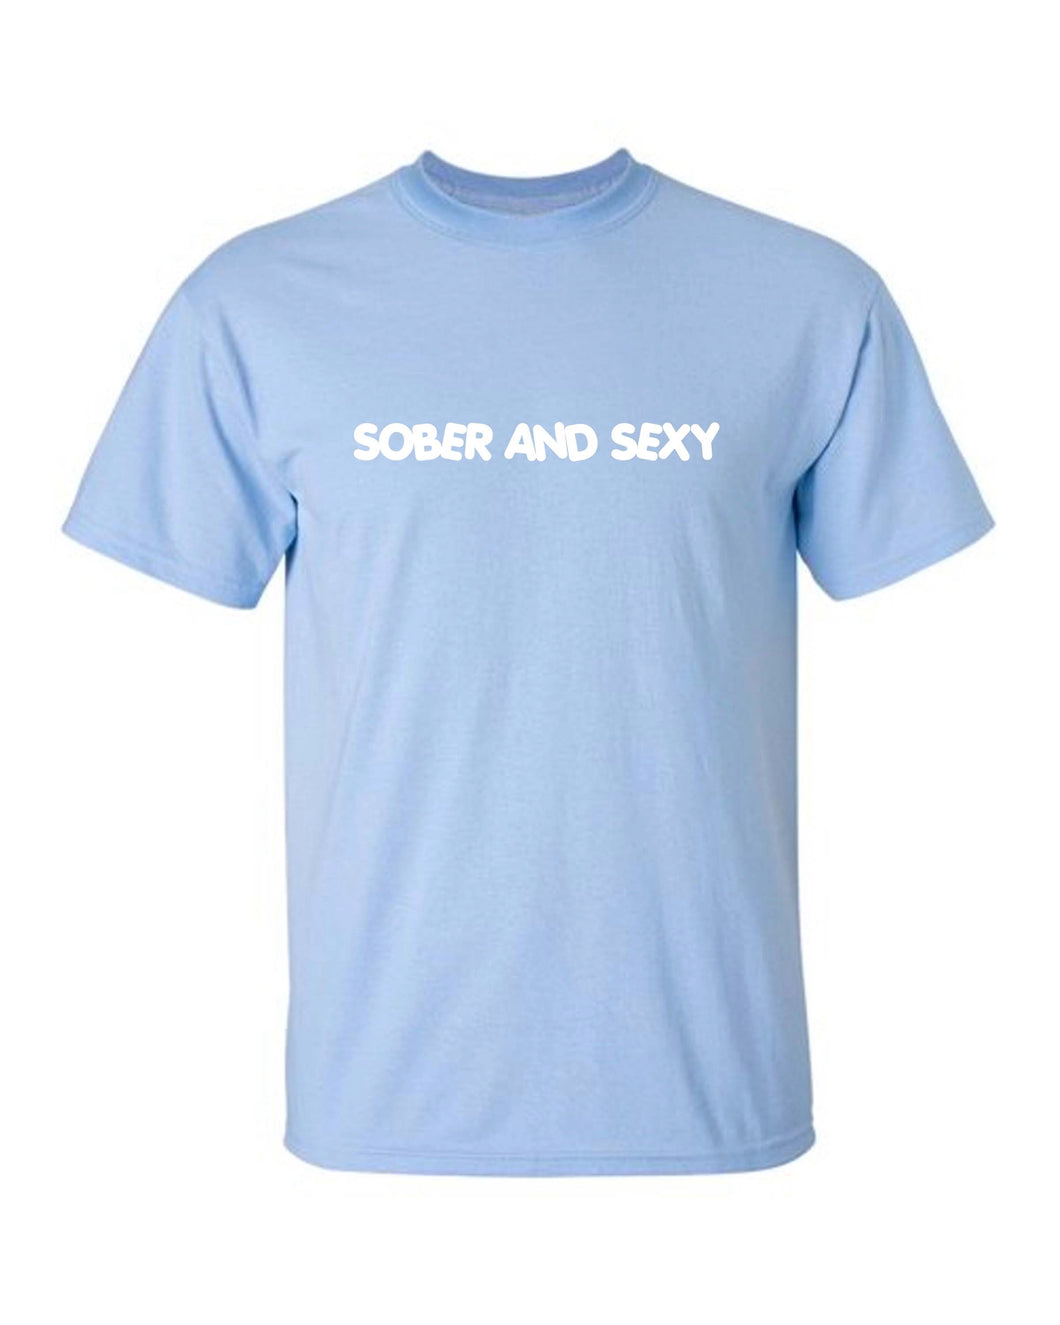 Sober and Sexy Blue Tee